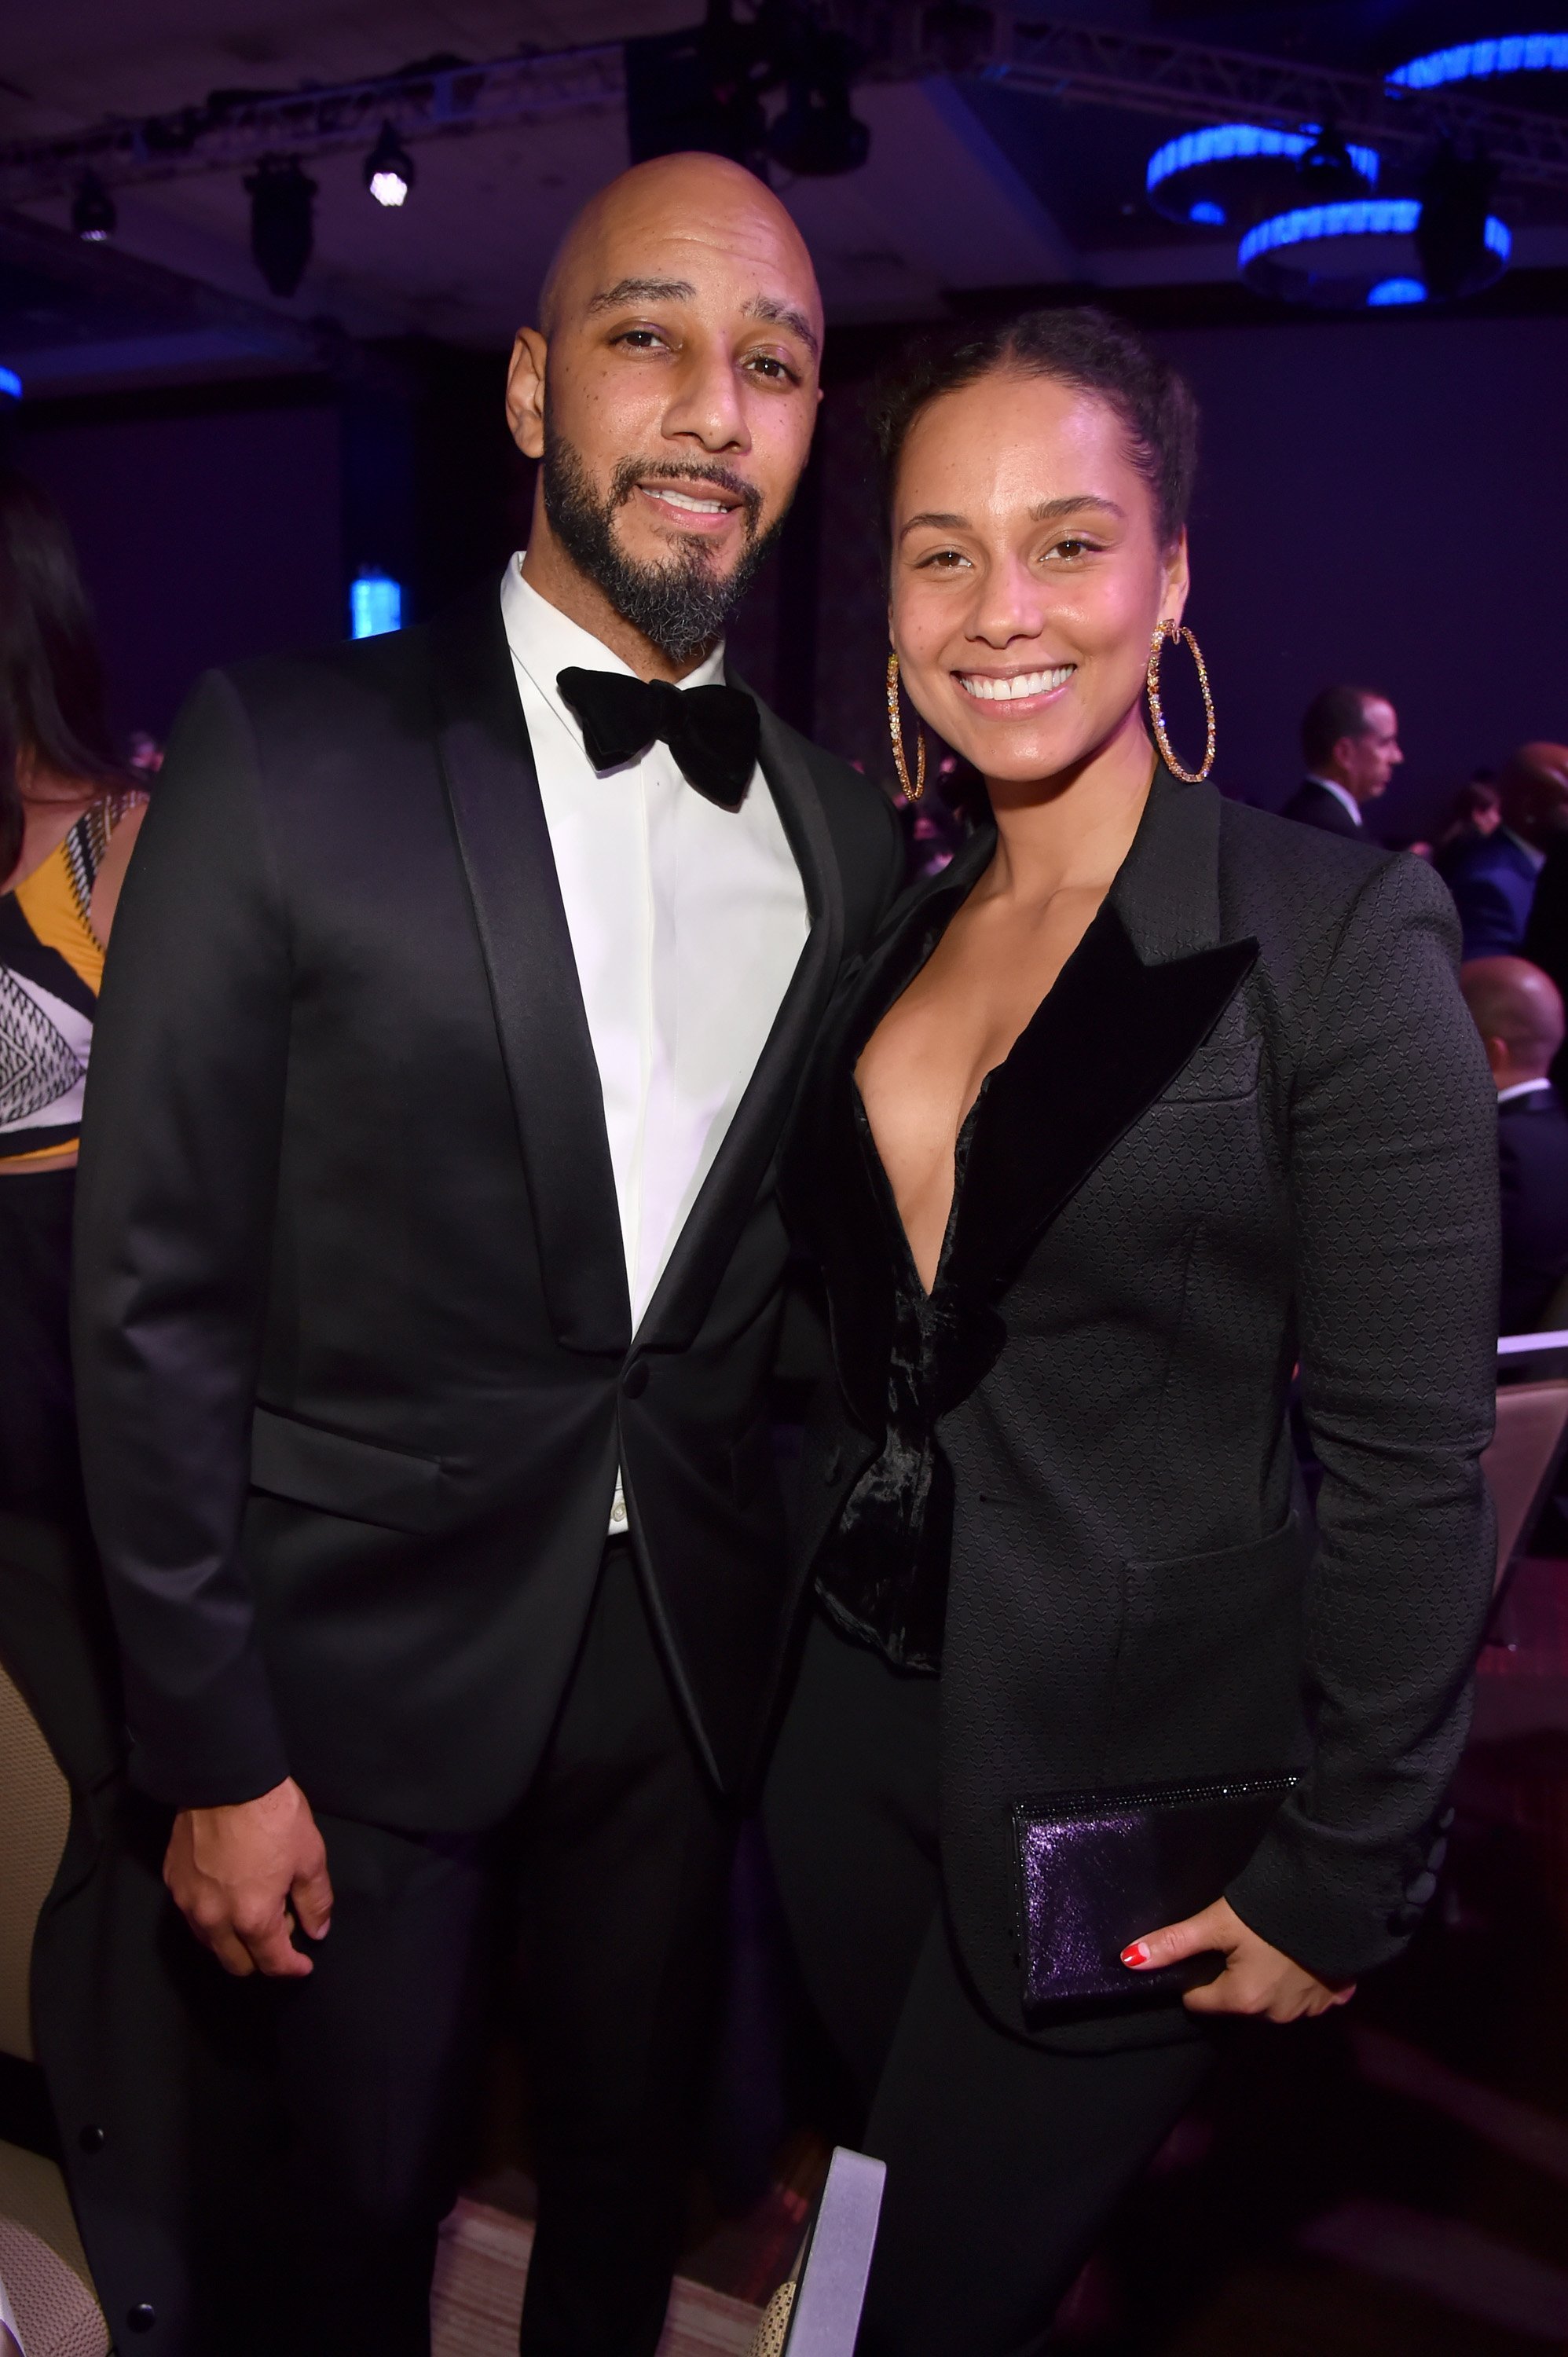 Swiss Beatz and Alicia Keys at a Pre-Grammy gala in January 2018. | Photo: Getty Images